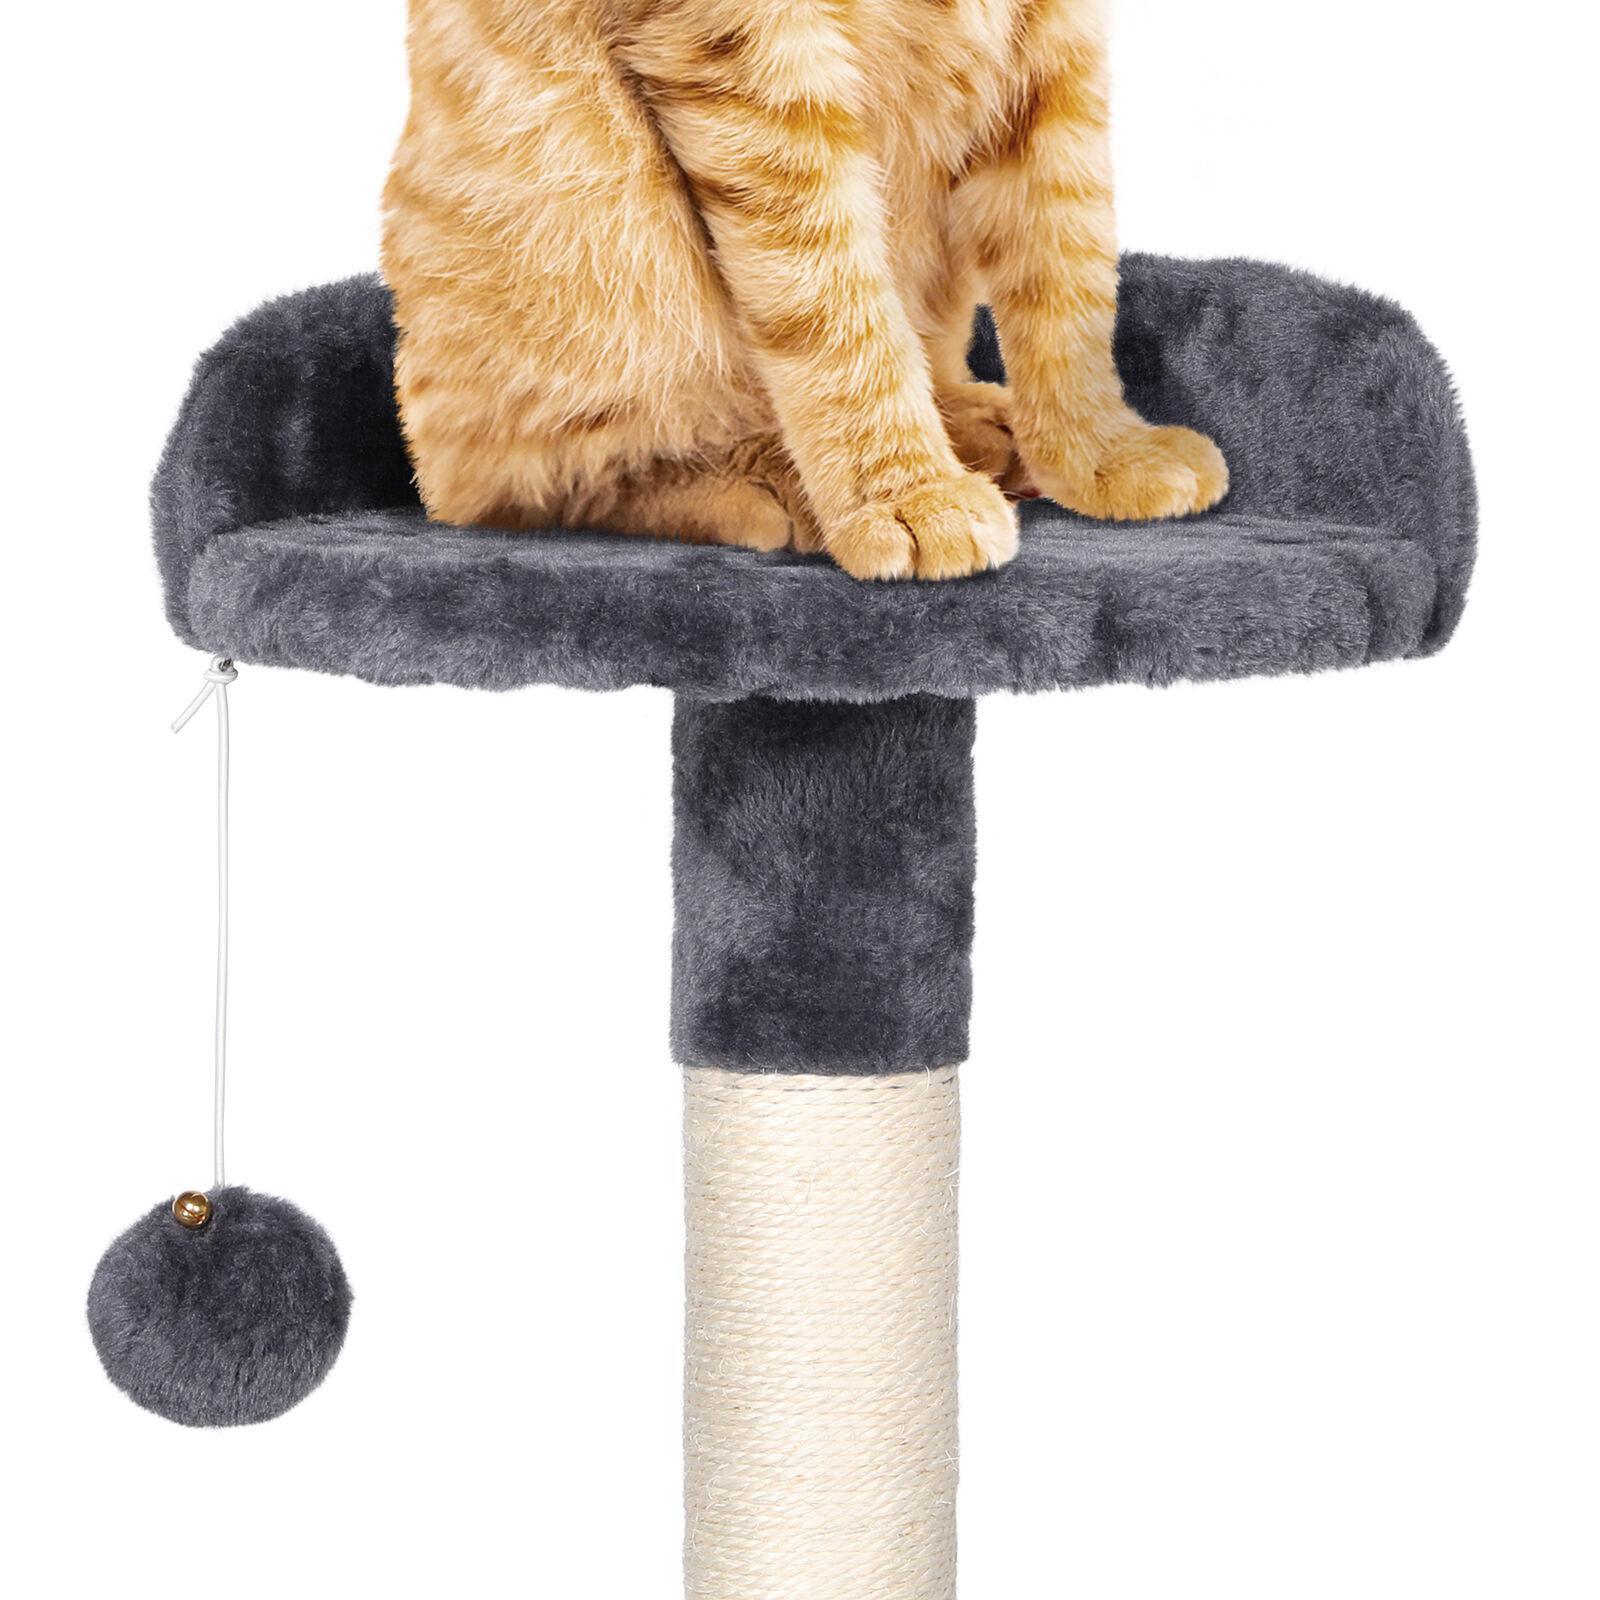 79" Large Cat Tree Tower Condo Scratching Post Pet Play House (Gray and White) - Etyn Online {{ product_tag }}